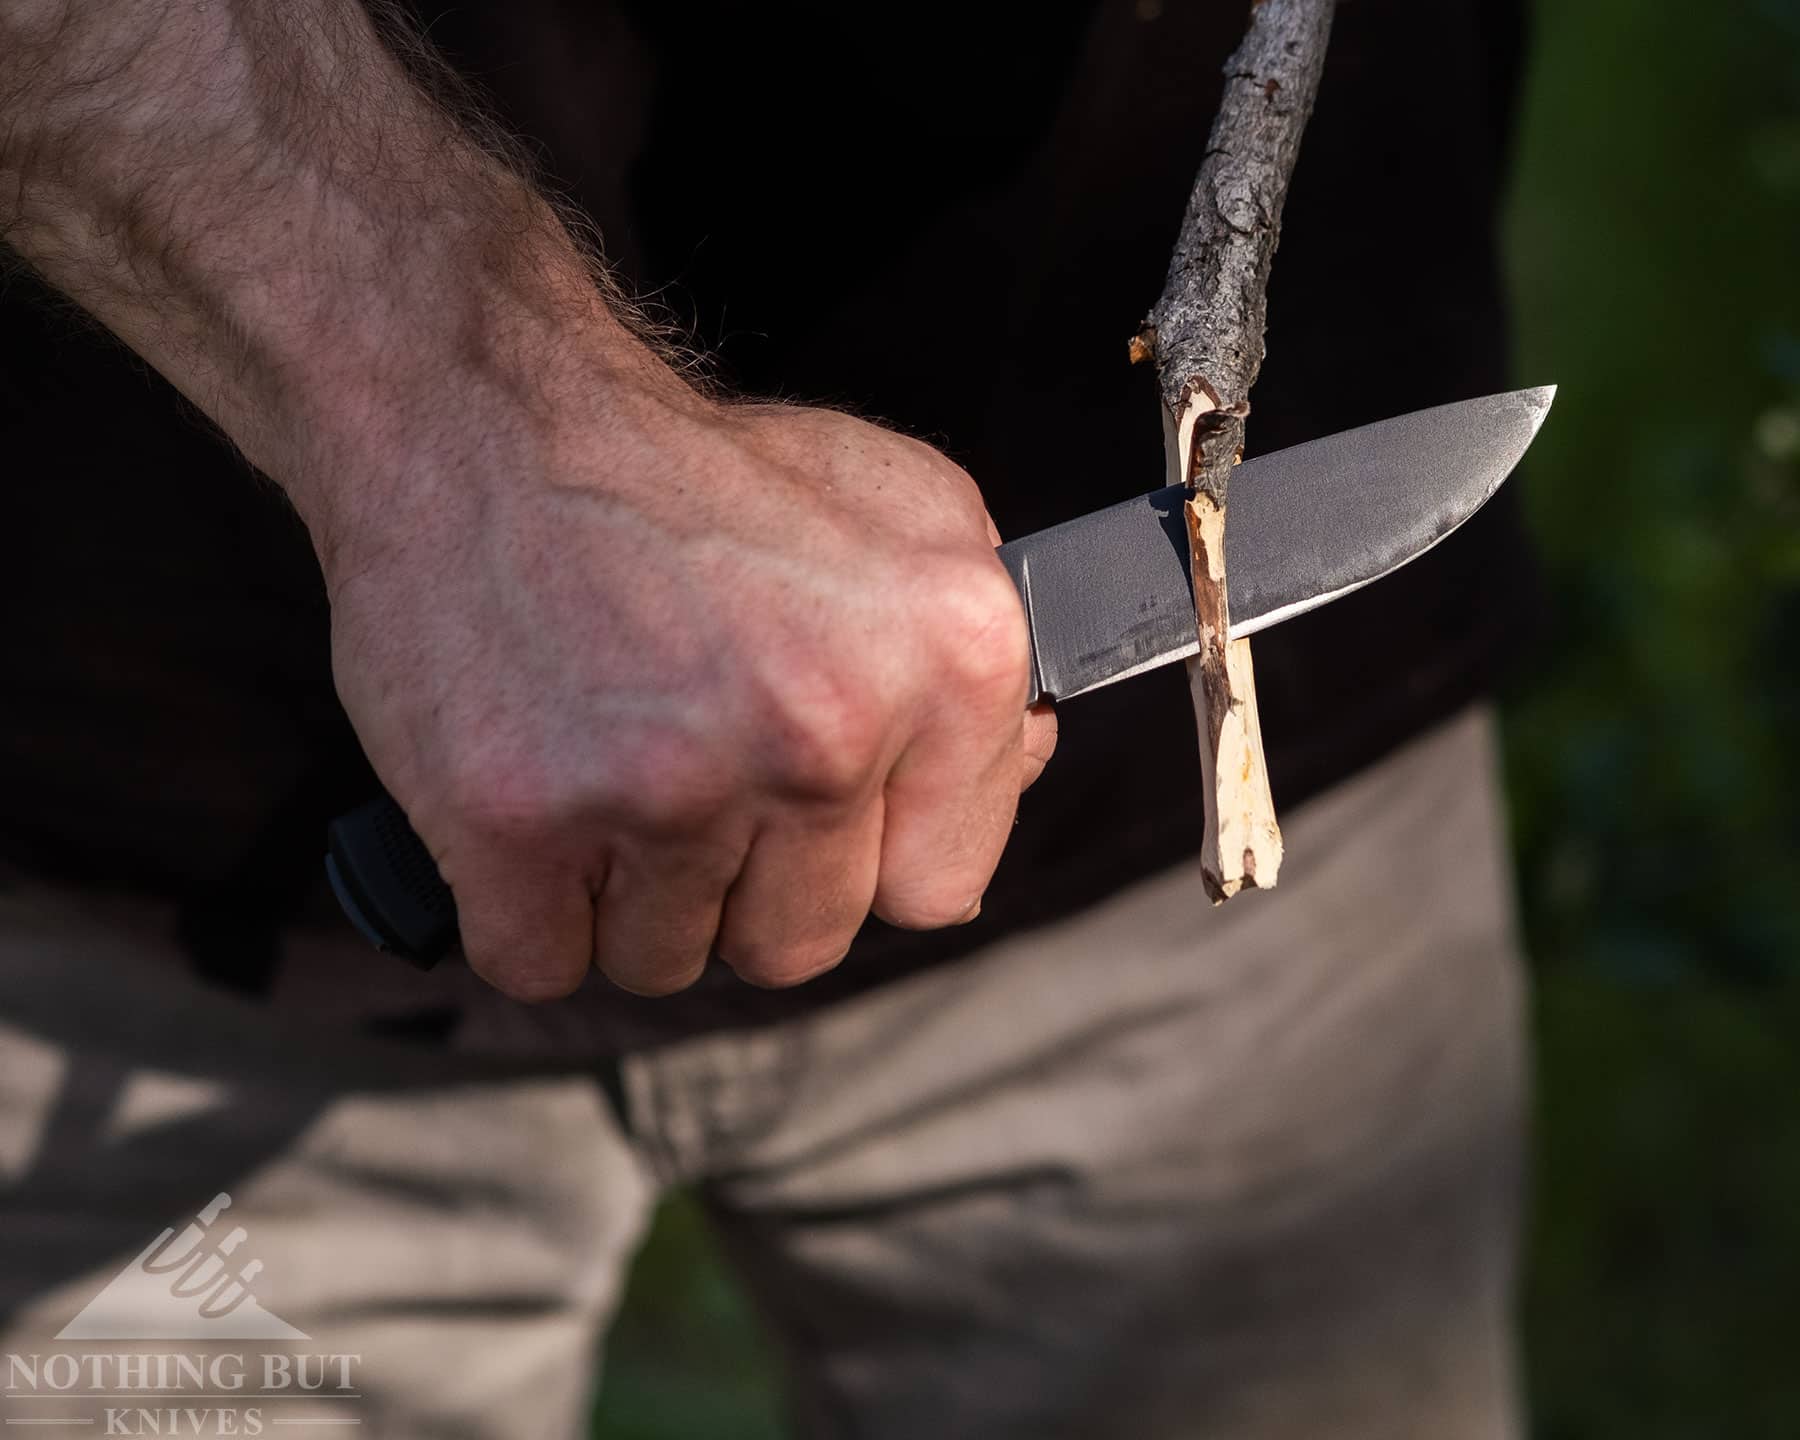 The Falkniven F1 has been a popular survival knife for almost 30 years. 